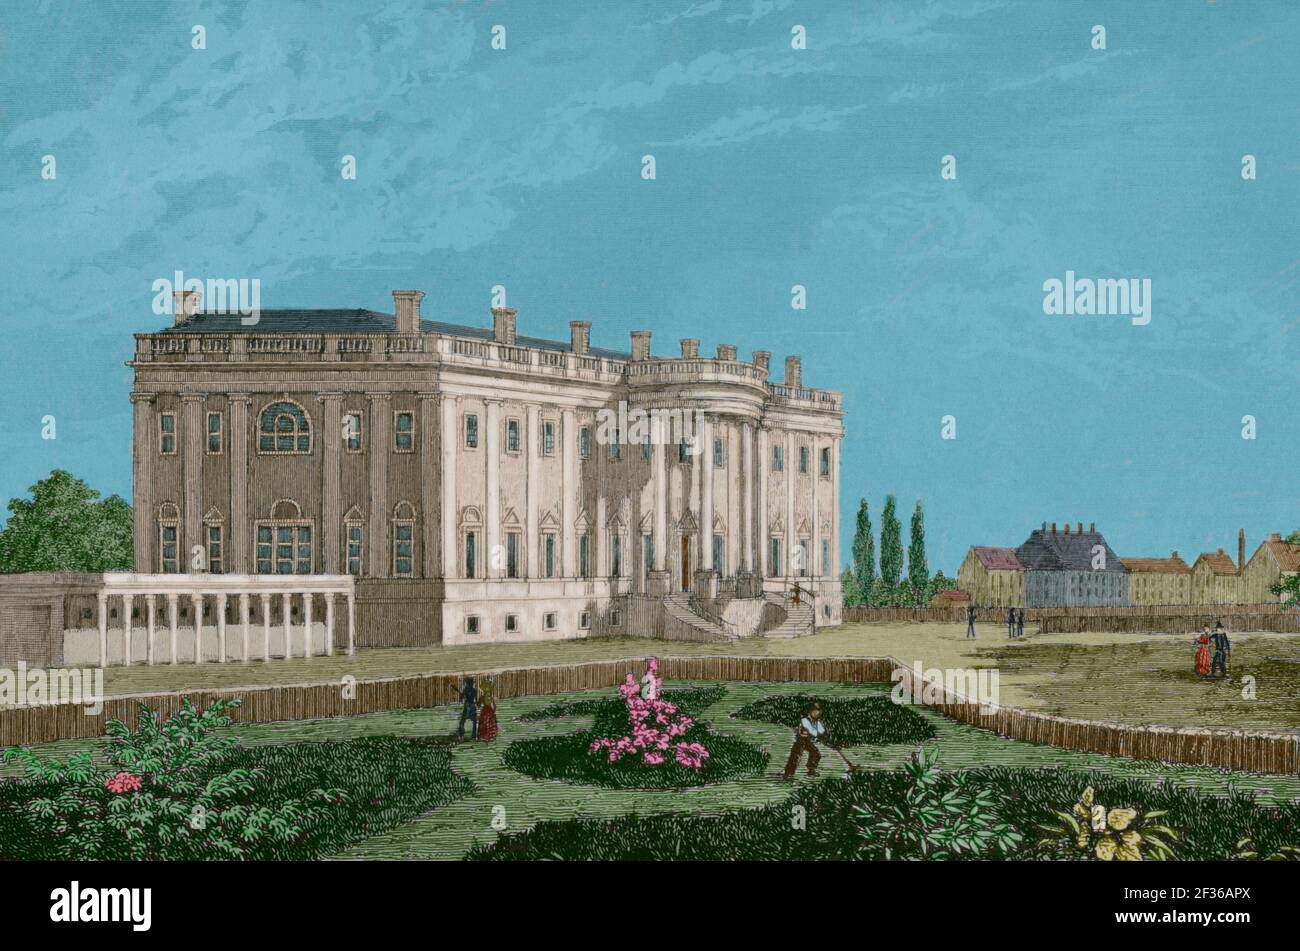 United States, Washington D.C. The White House. Designed by James Hoban (1758-1831), in Neoclassical style, its construction took place between 1792 and 1800. It has been the residence of every U.S, president since John Adams in 1800. Engraving by Arnout. Panorama Universal. History of the United States of America, from 1st edition of Jean B.G. Roux de Rochelle's Etats-Unis d'Amérique in 1837. Spanish edition, printed in Barcelona, 1850. Later colouration. Stock Photo